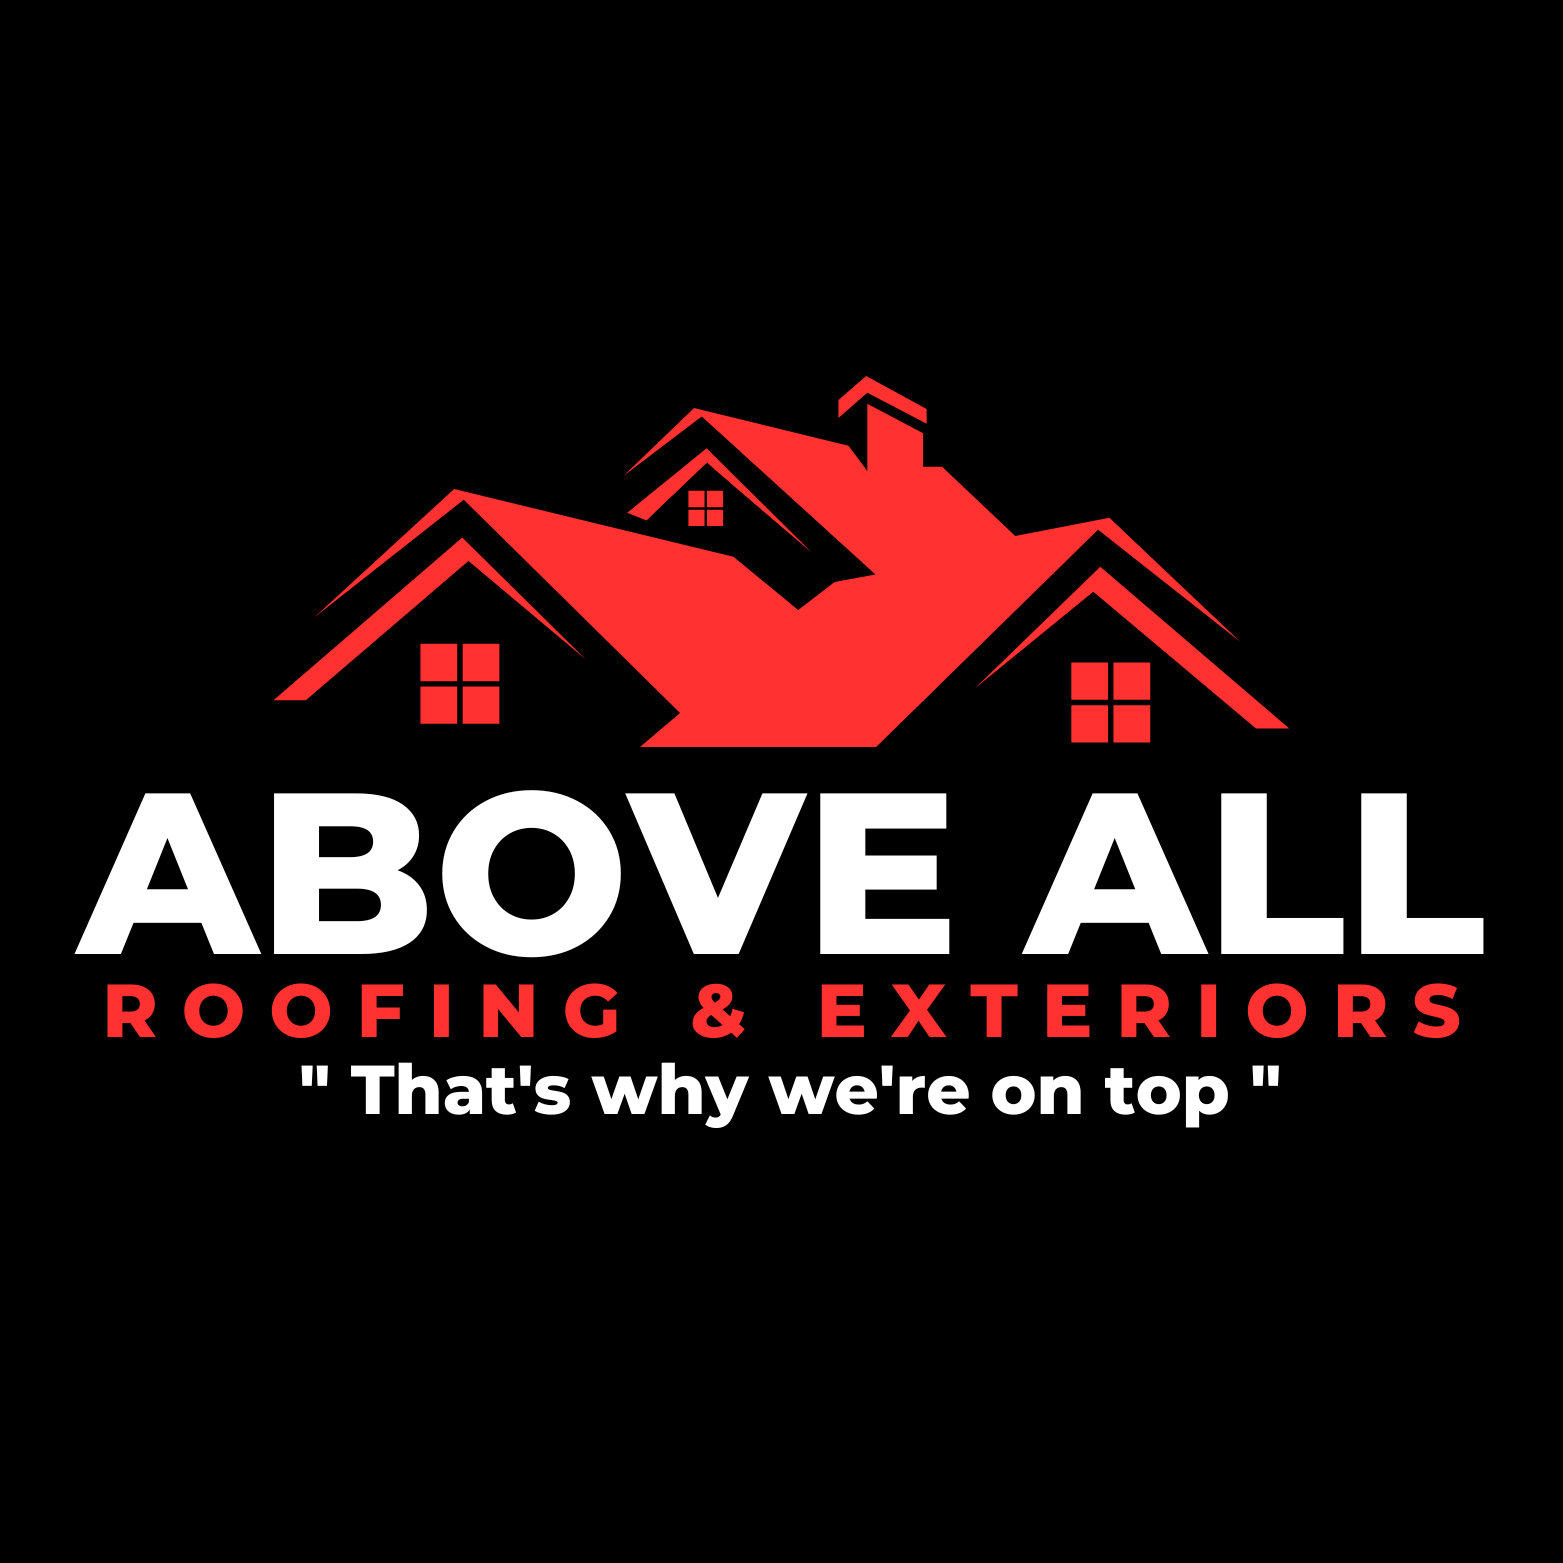 Above All Roofing's logo